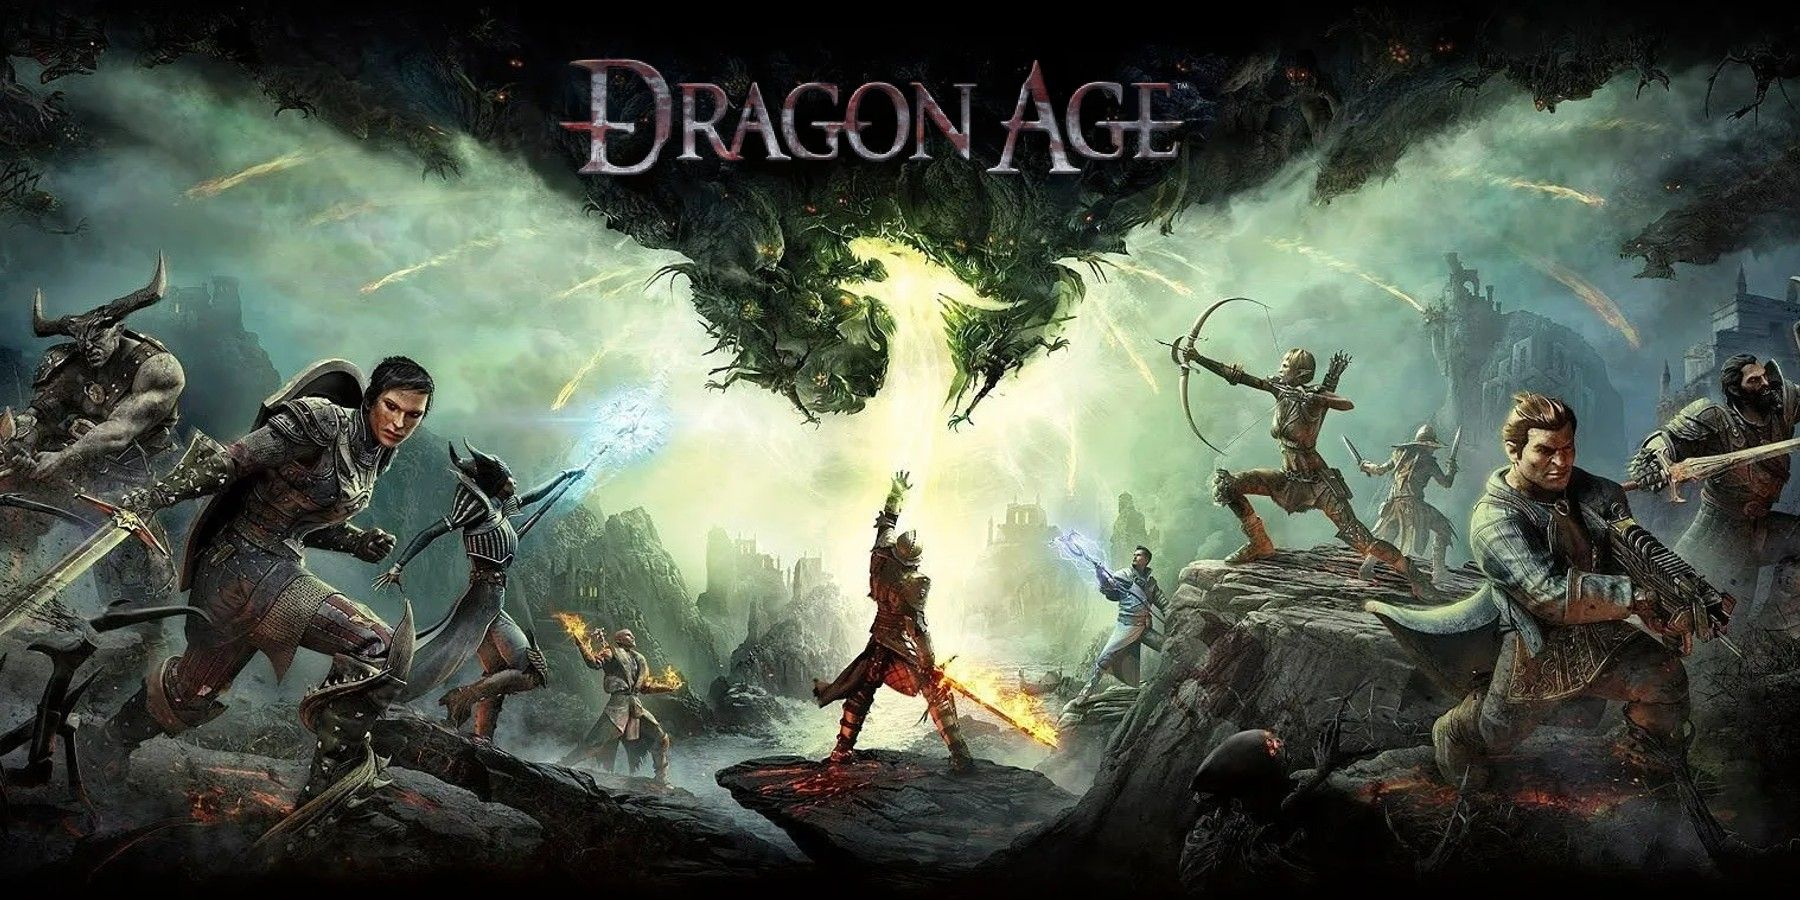 Gaming] Dragon Age Trilogy – The 3 Protagonist